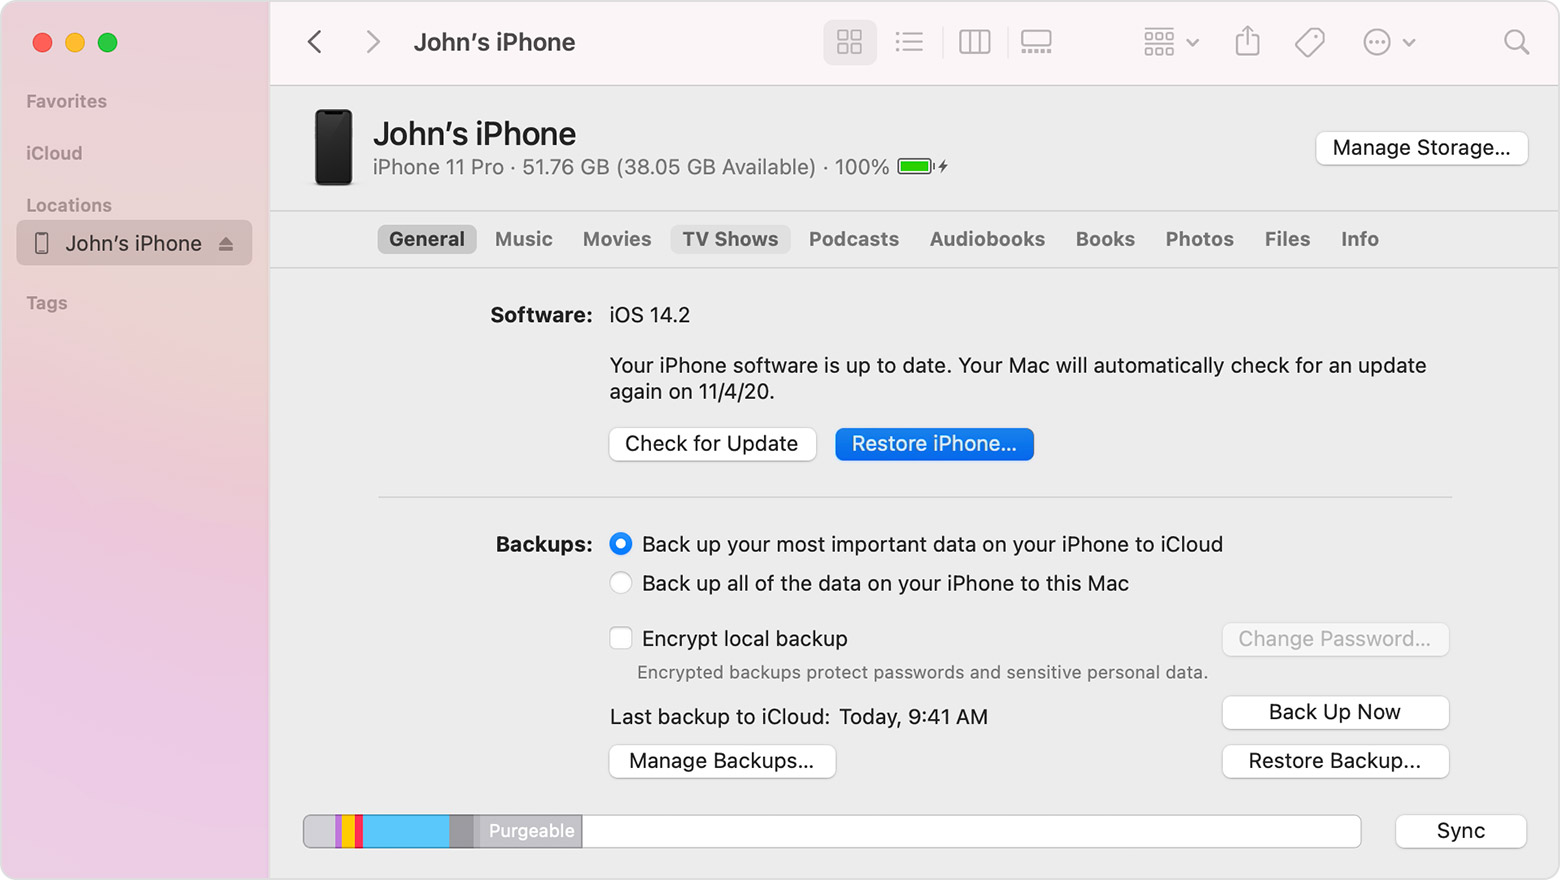 Restore your iPhone, iPad, or iPod to factory settings - Apple Support